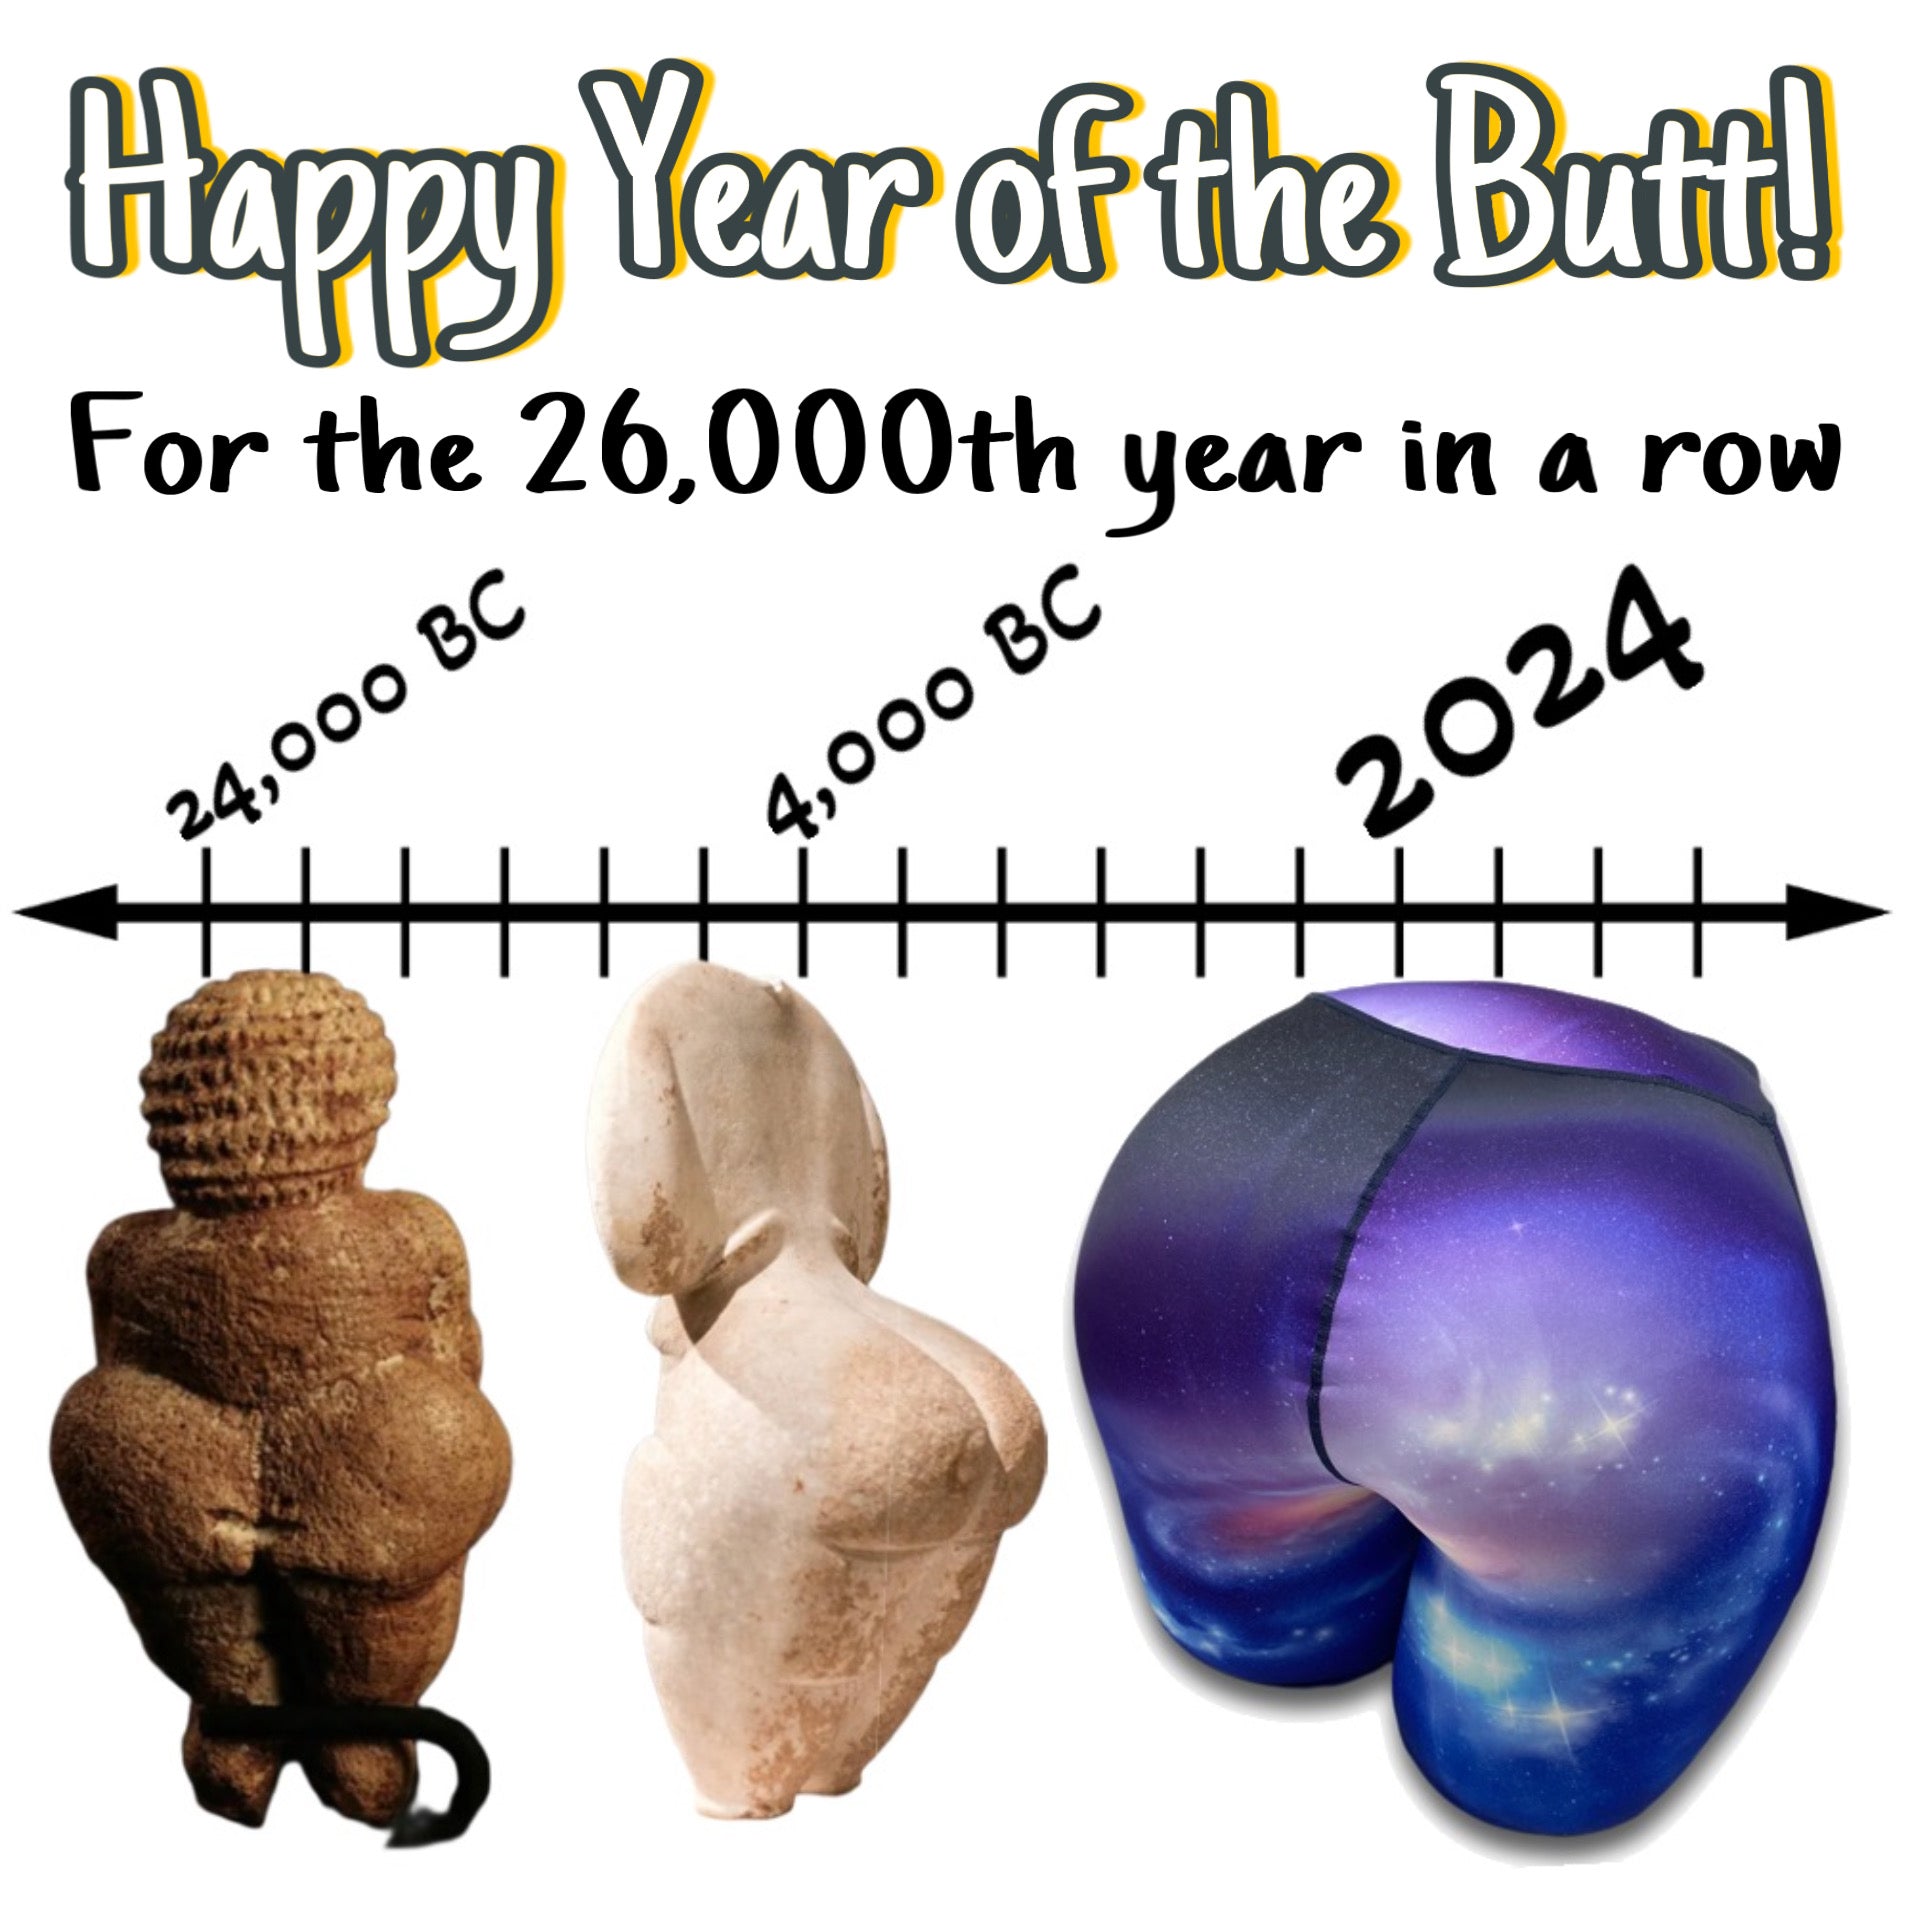 Happy 2024! The year of the butt for 26,000 years in a row